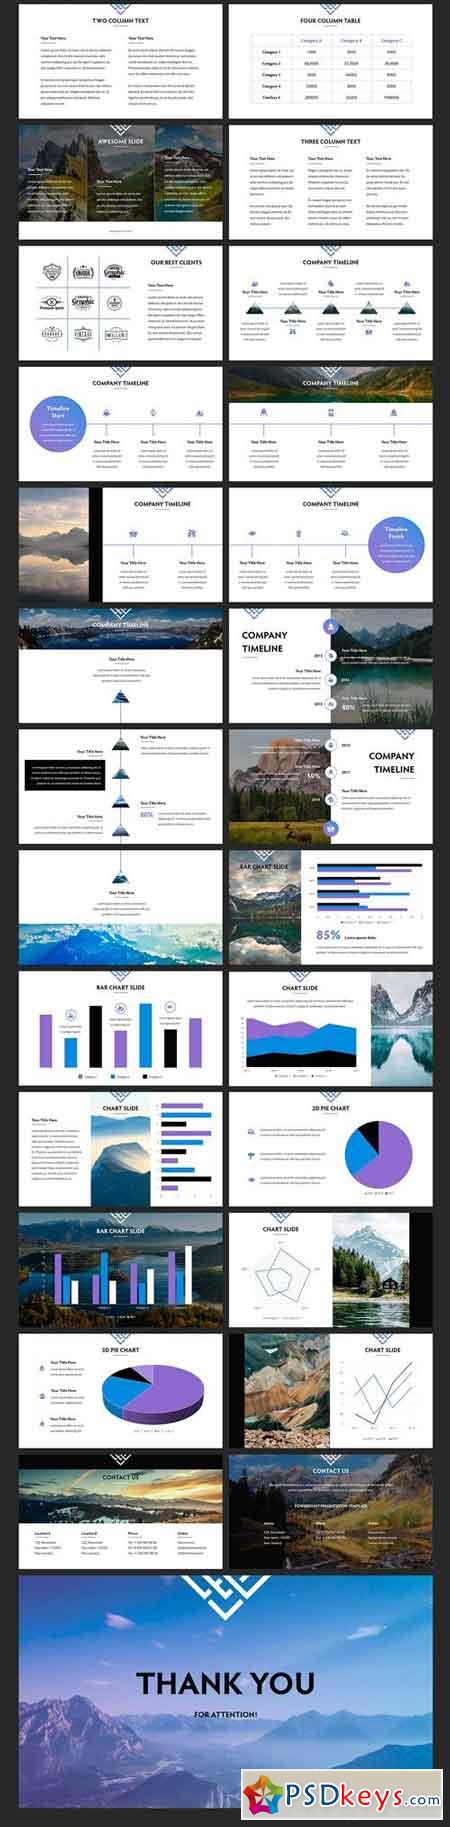 Mountains - Powerpoint Template 1987072